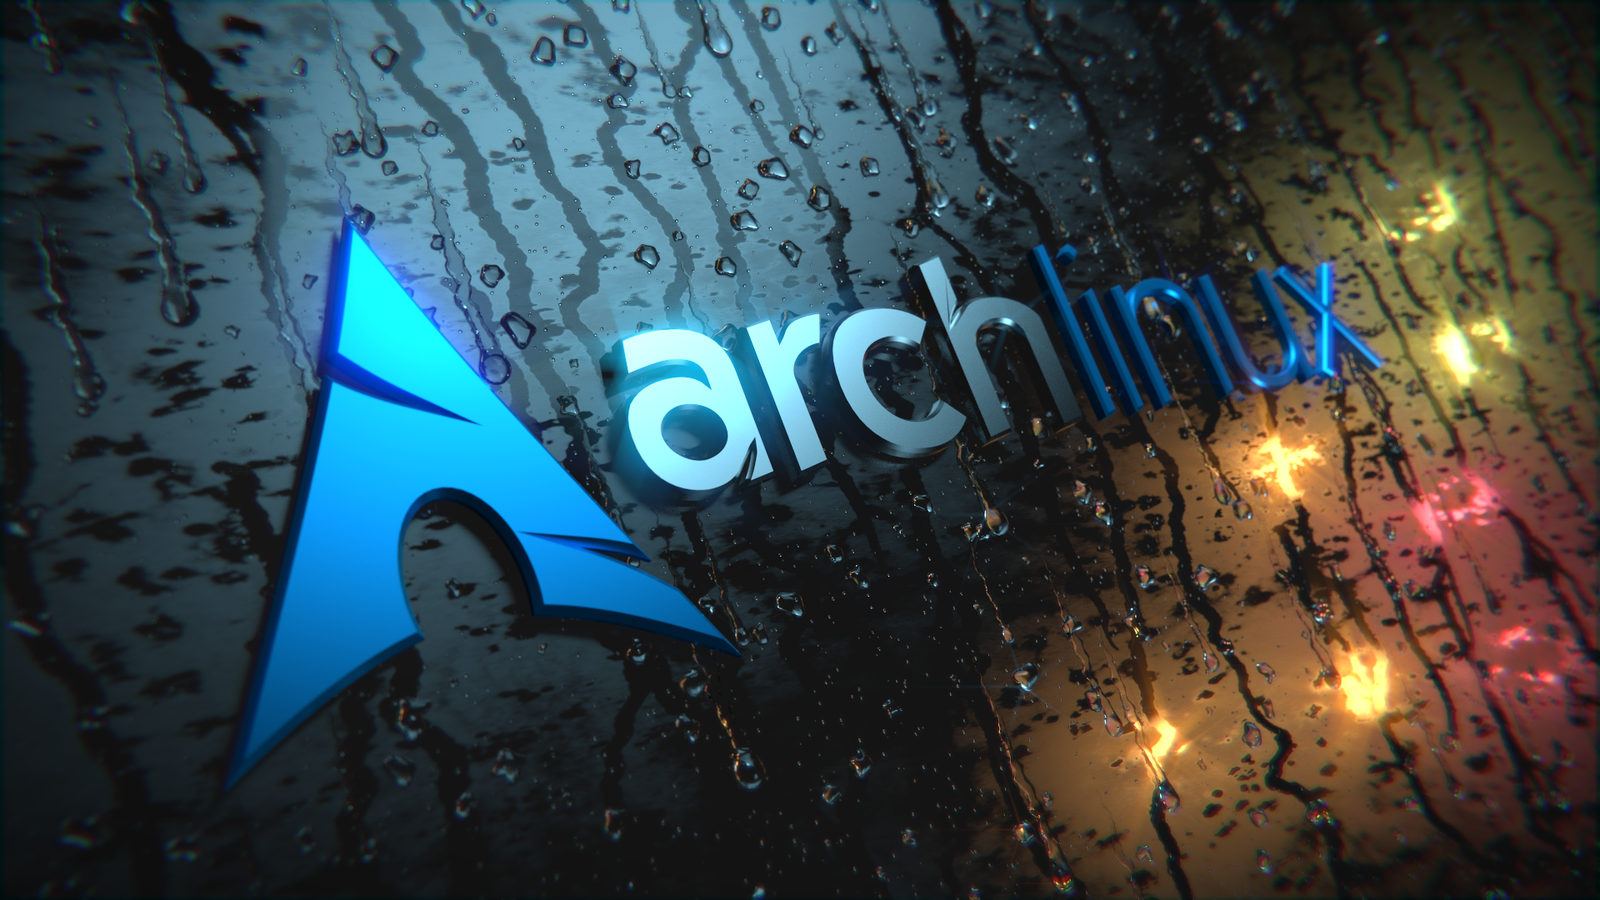 arch linux iso download